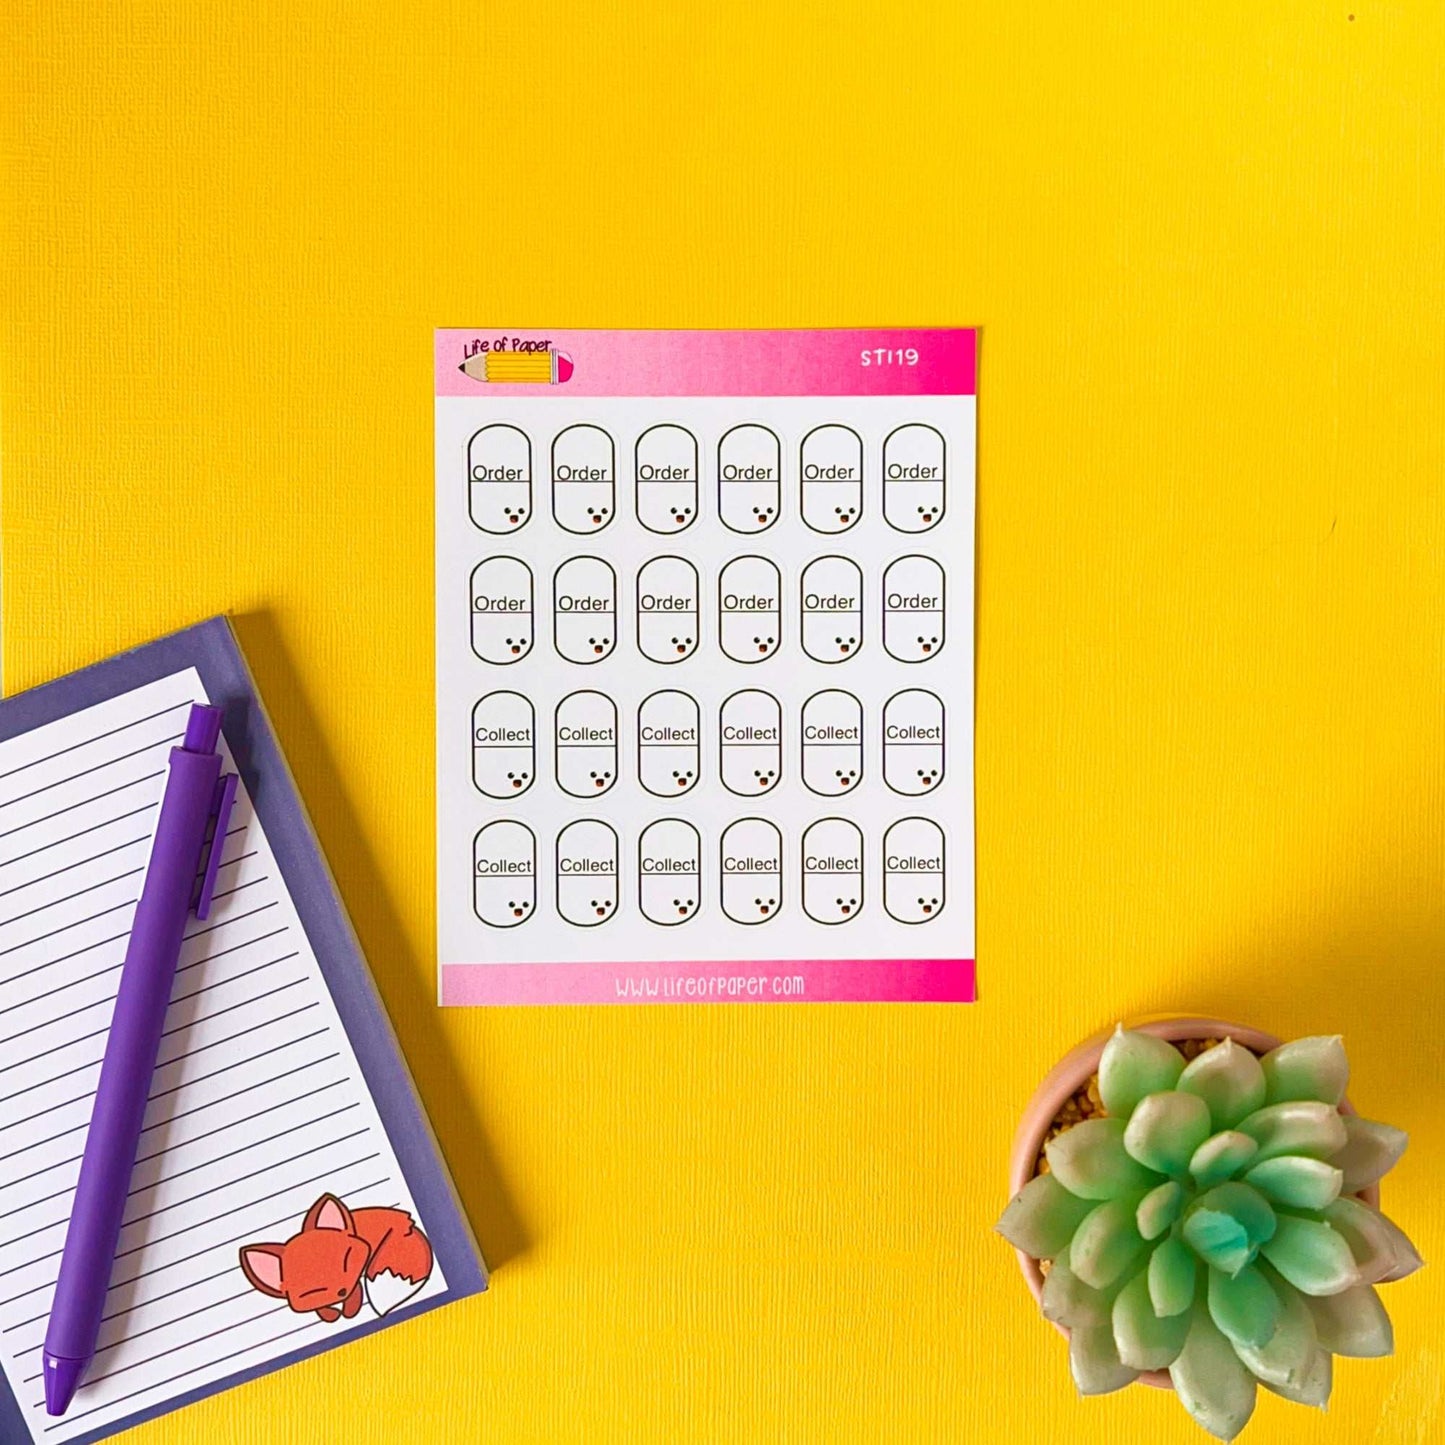 A vibrant yellow background features a purple notebook with a pen on the left, a potted succulent on the right, and a sheet of cute "Order" and "Collect" Medication Planner Stickers in the center. The notebook has a small fox illustration in the bottom corner.